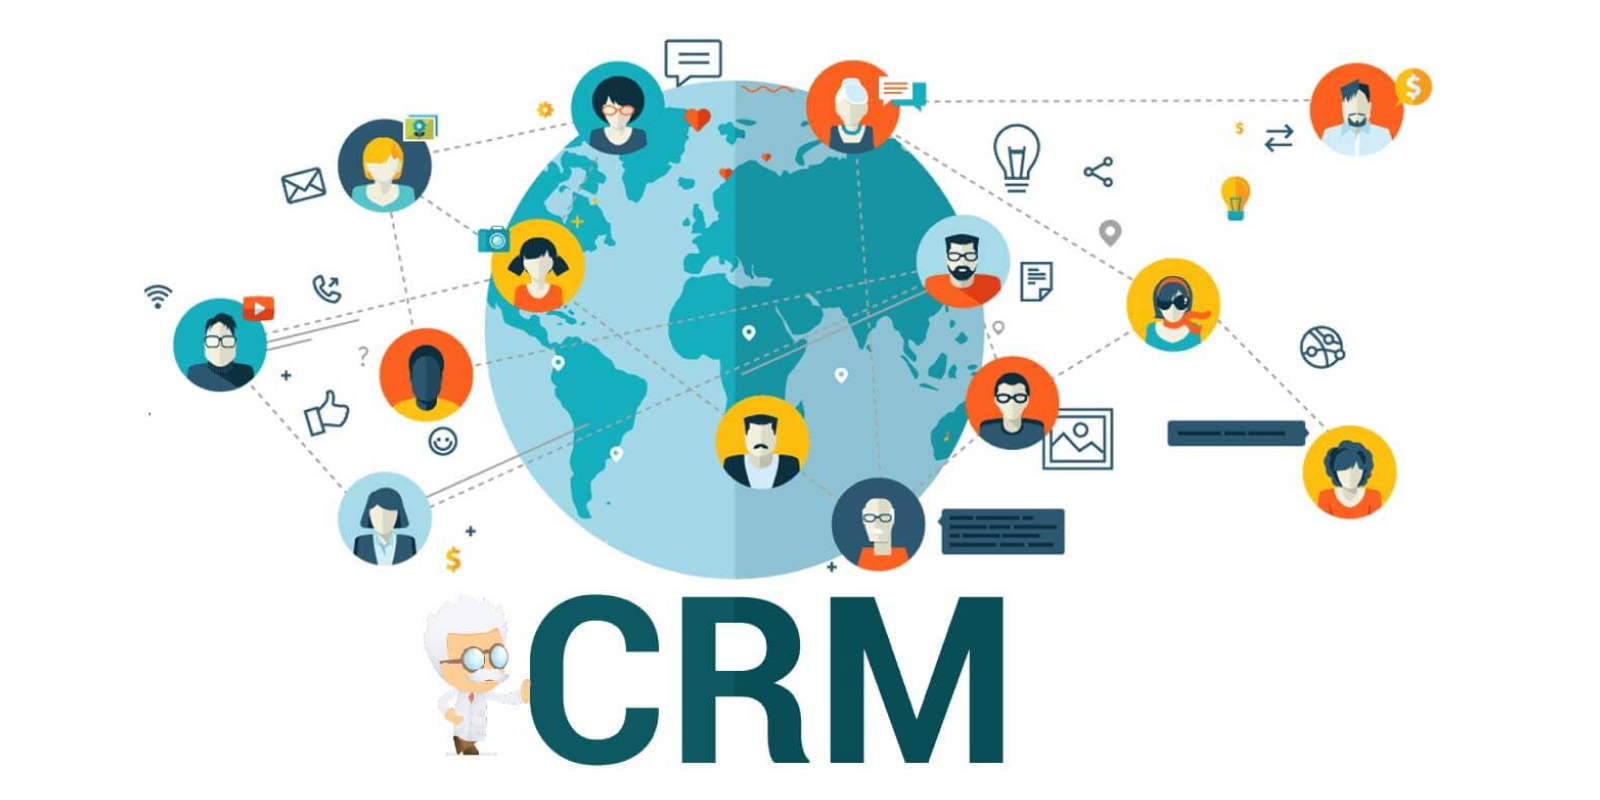 What is a CRM system